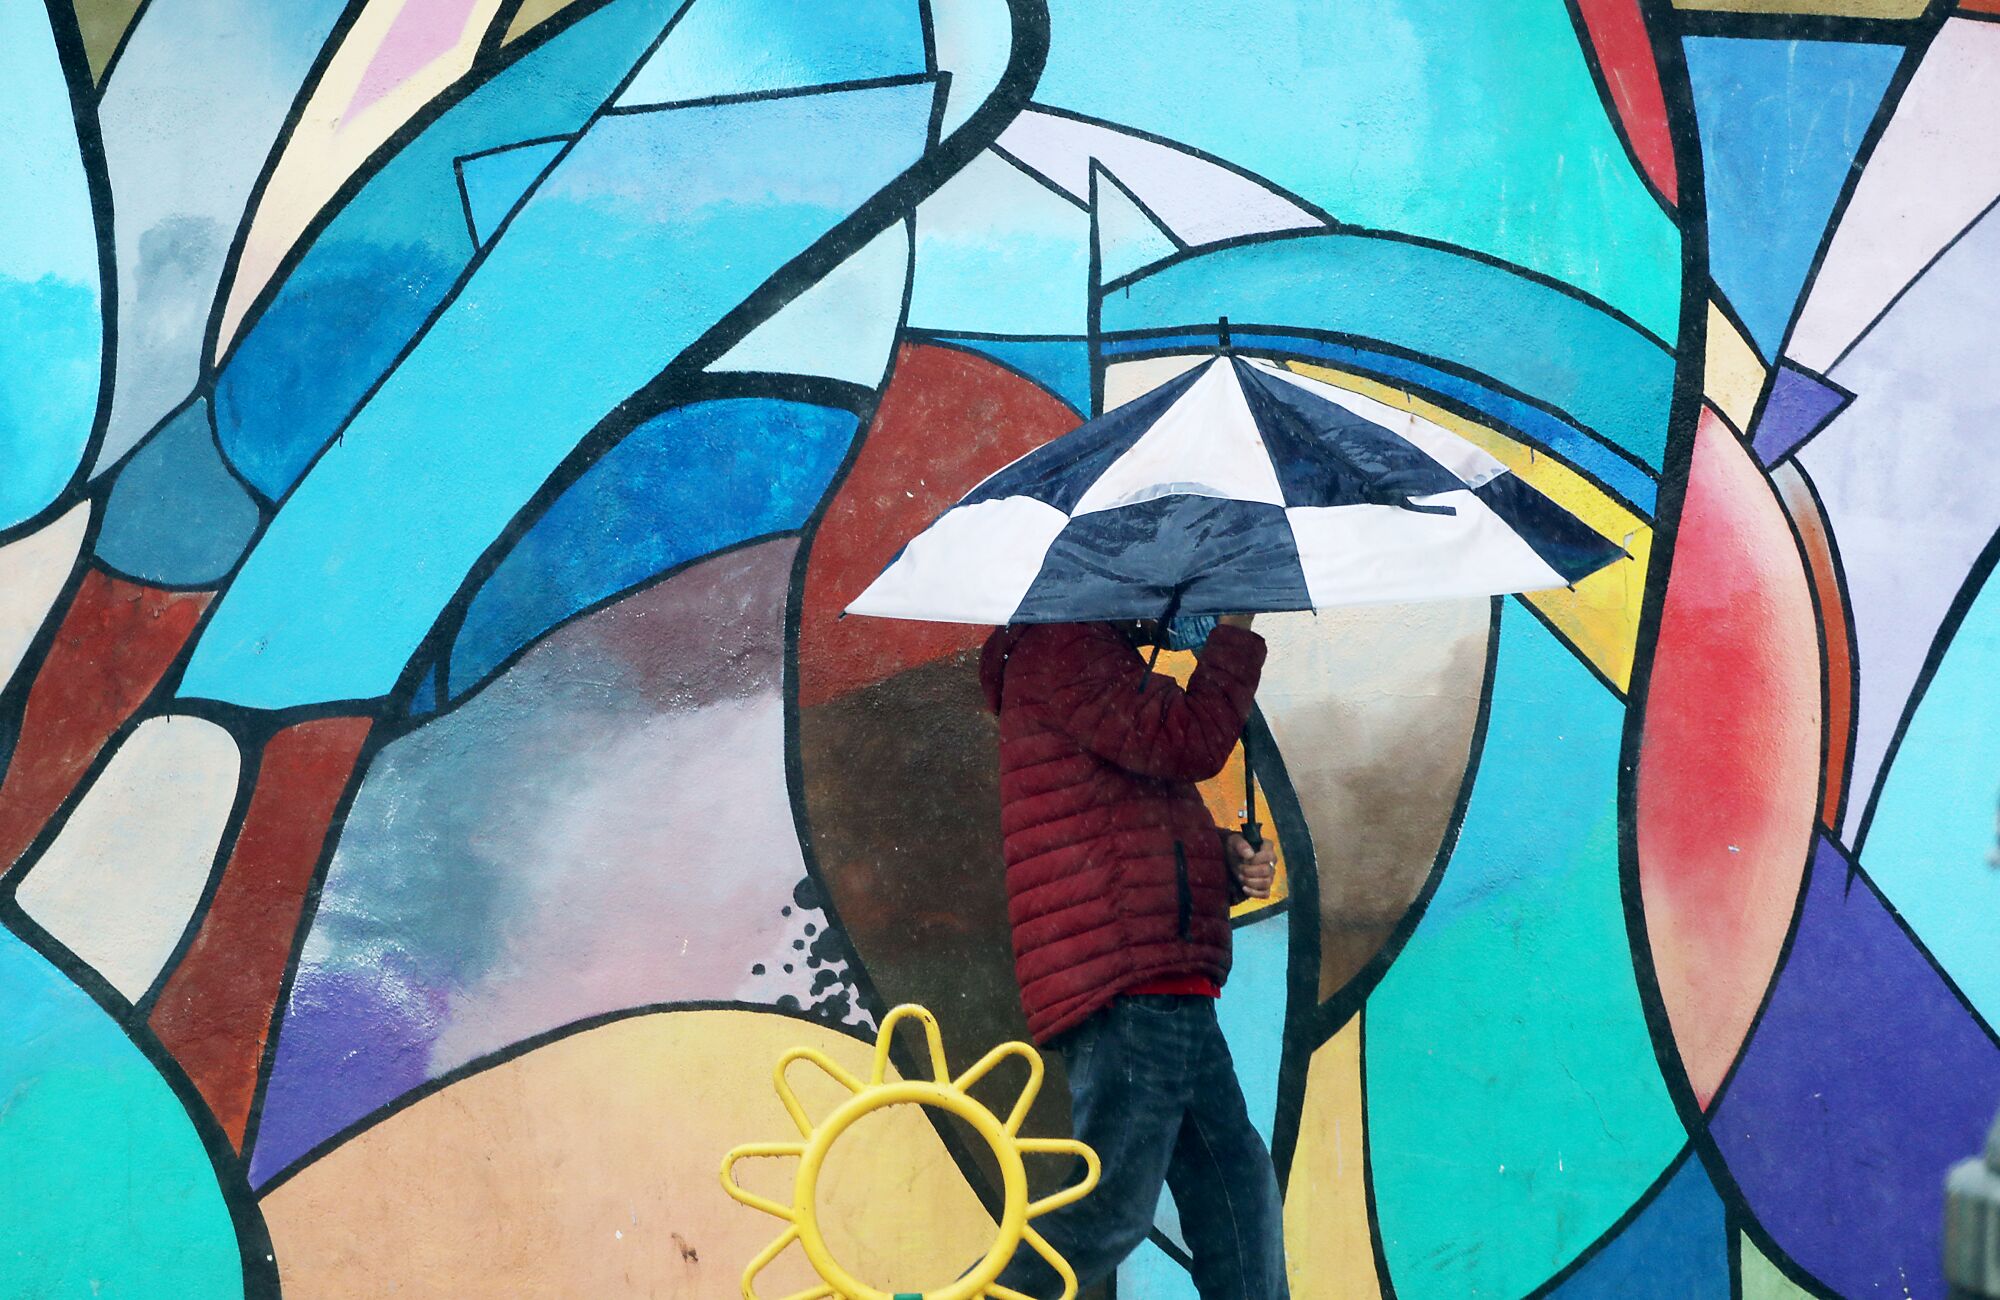 A person with an umbrella in front of a colorful mural.